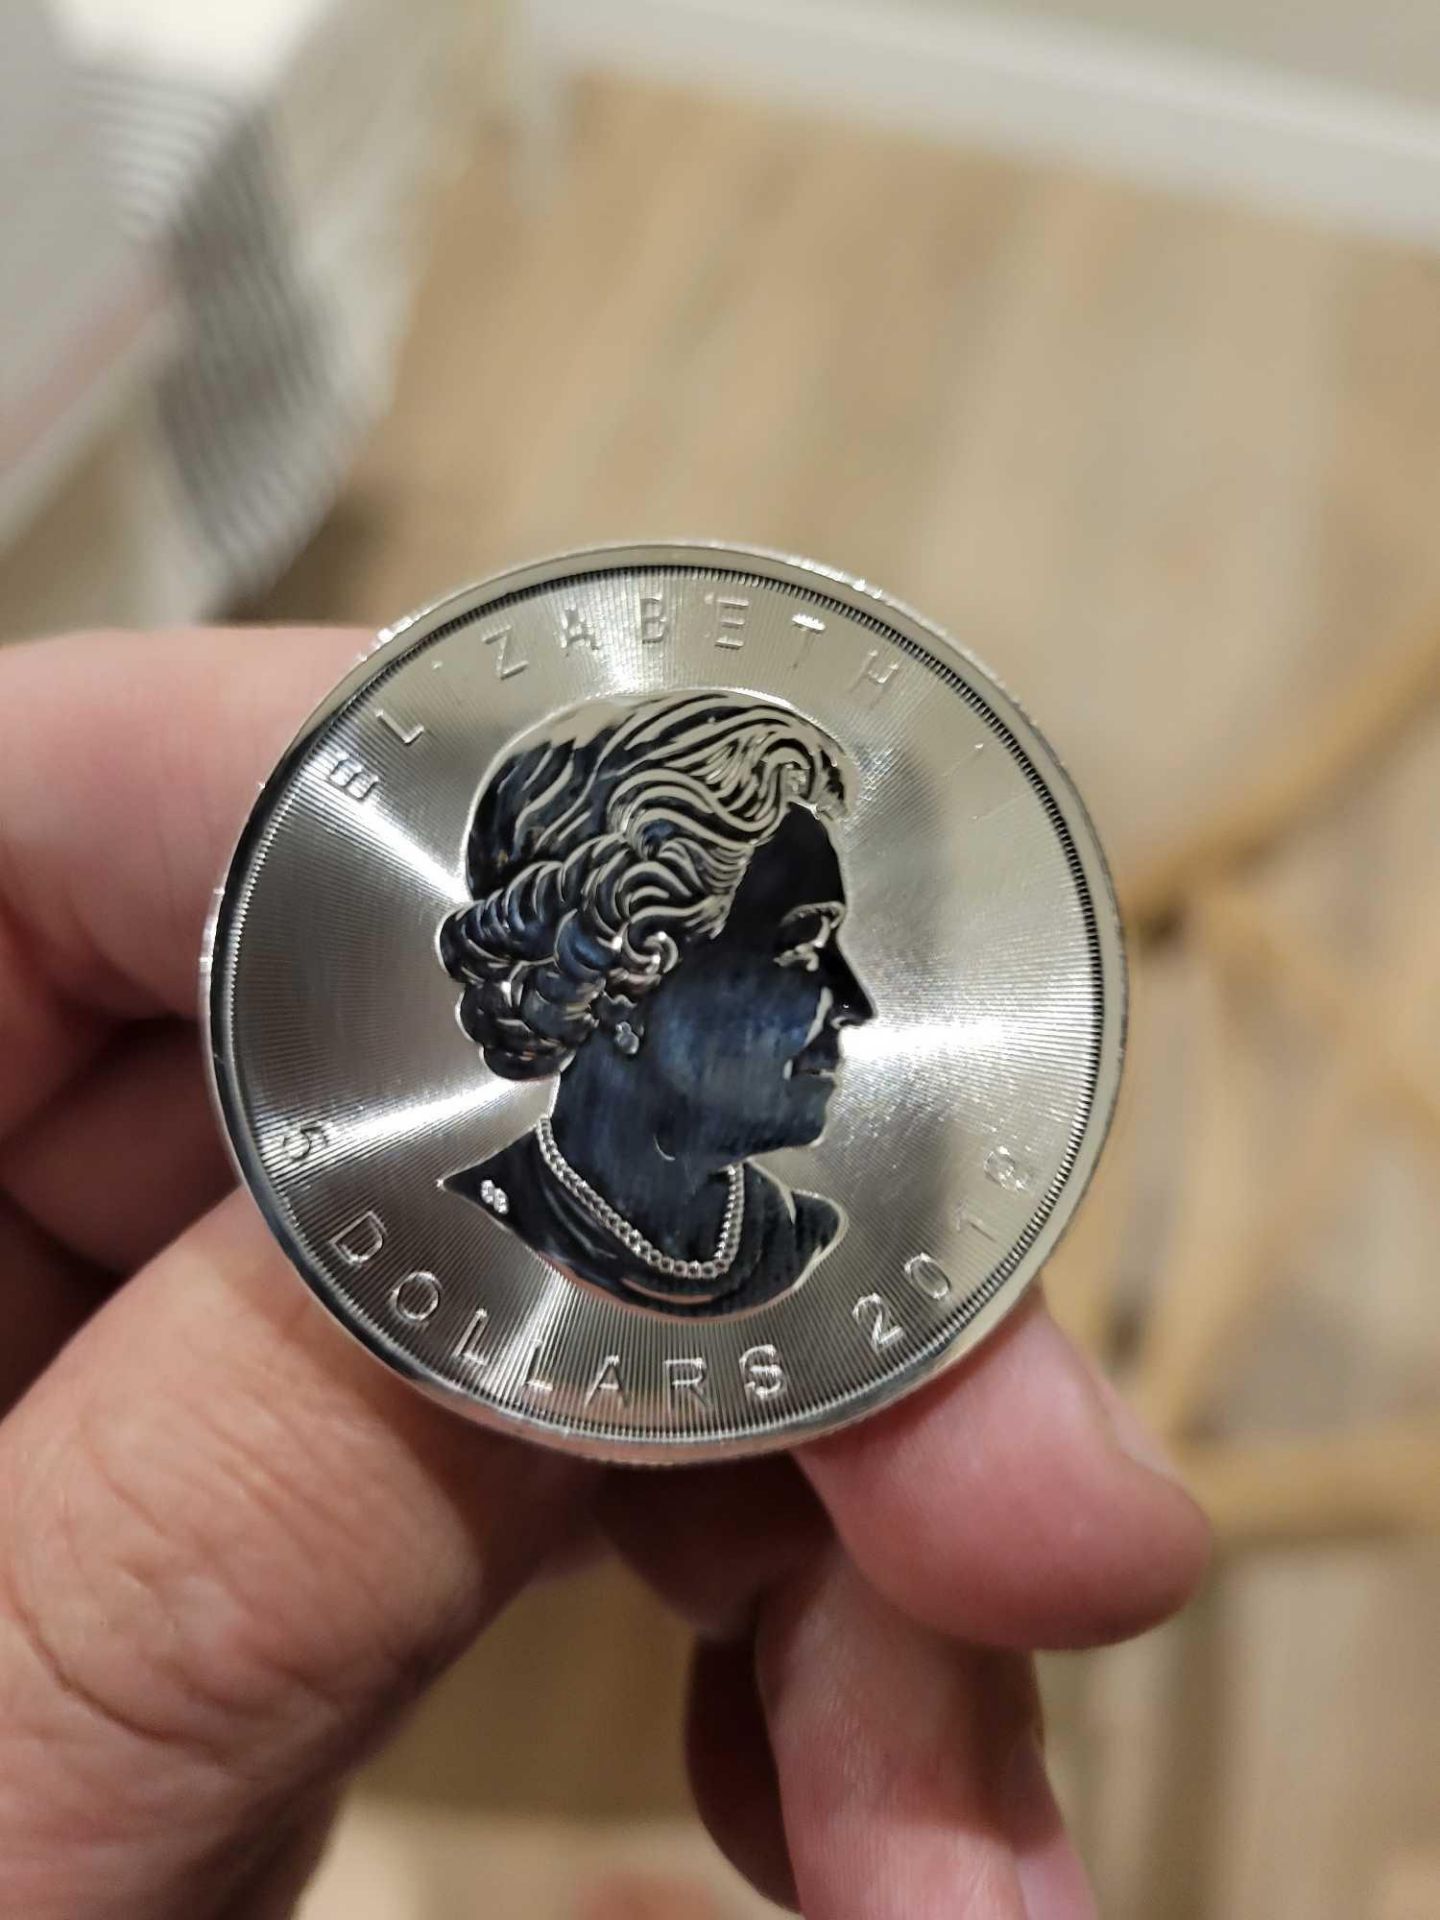 2 2019 Canadian Maple Leaf Silver Coins - Image 4 of 4